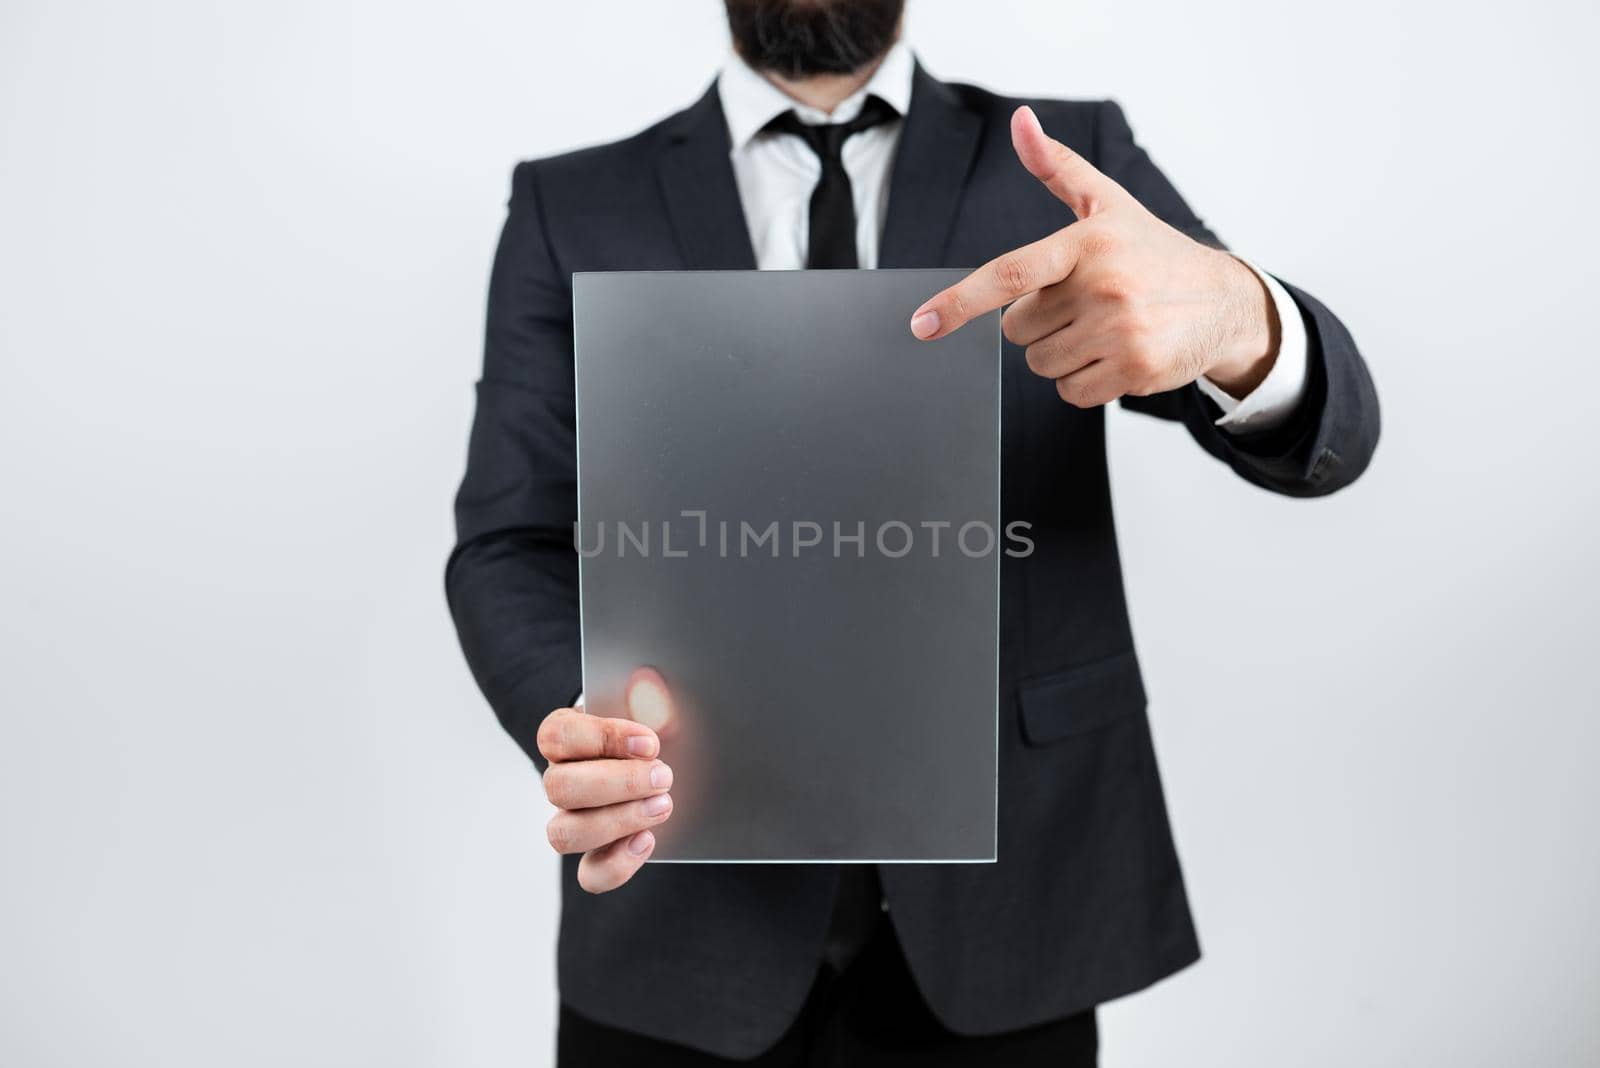 Male Professional Showing Placard And Advertising The Company.